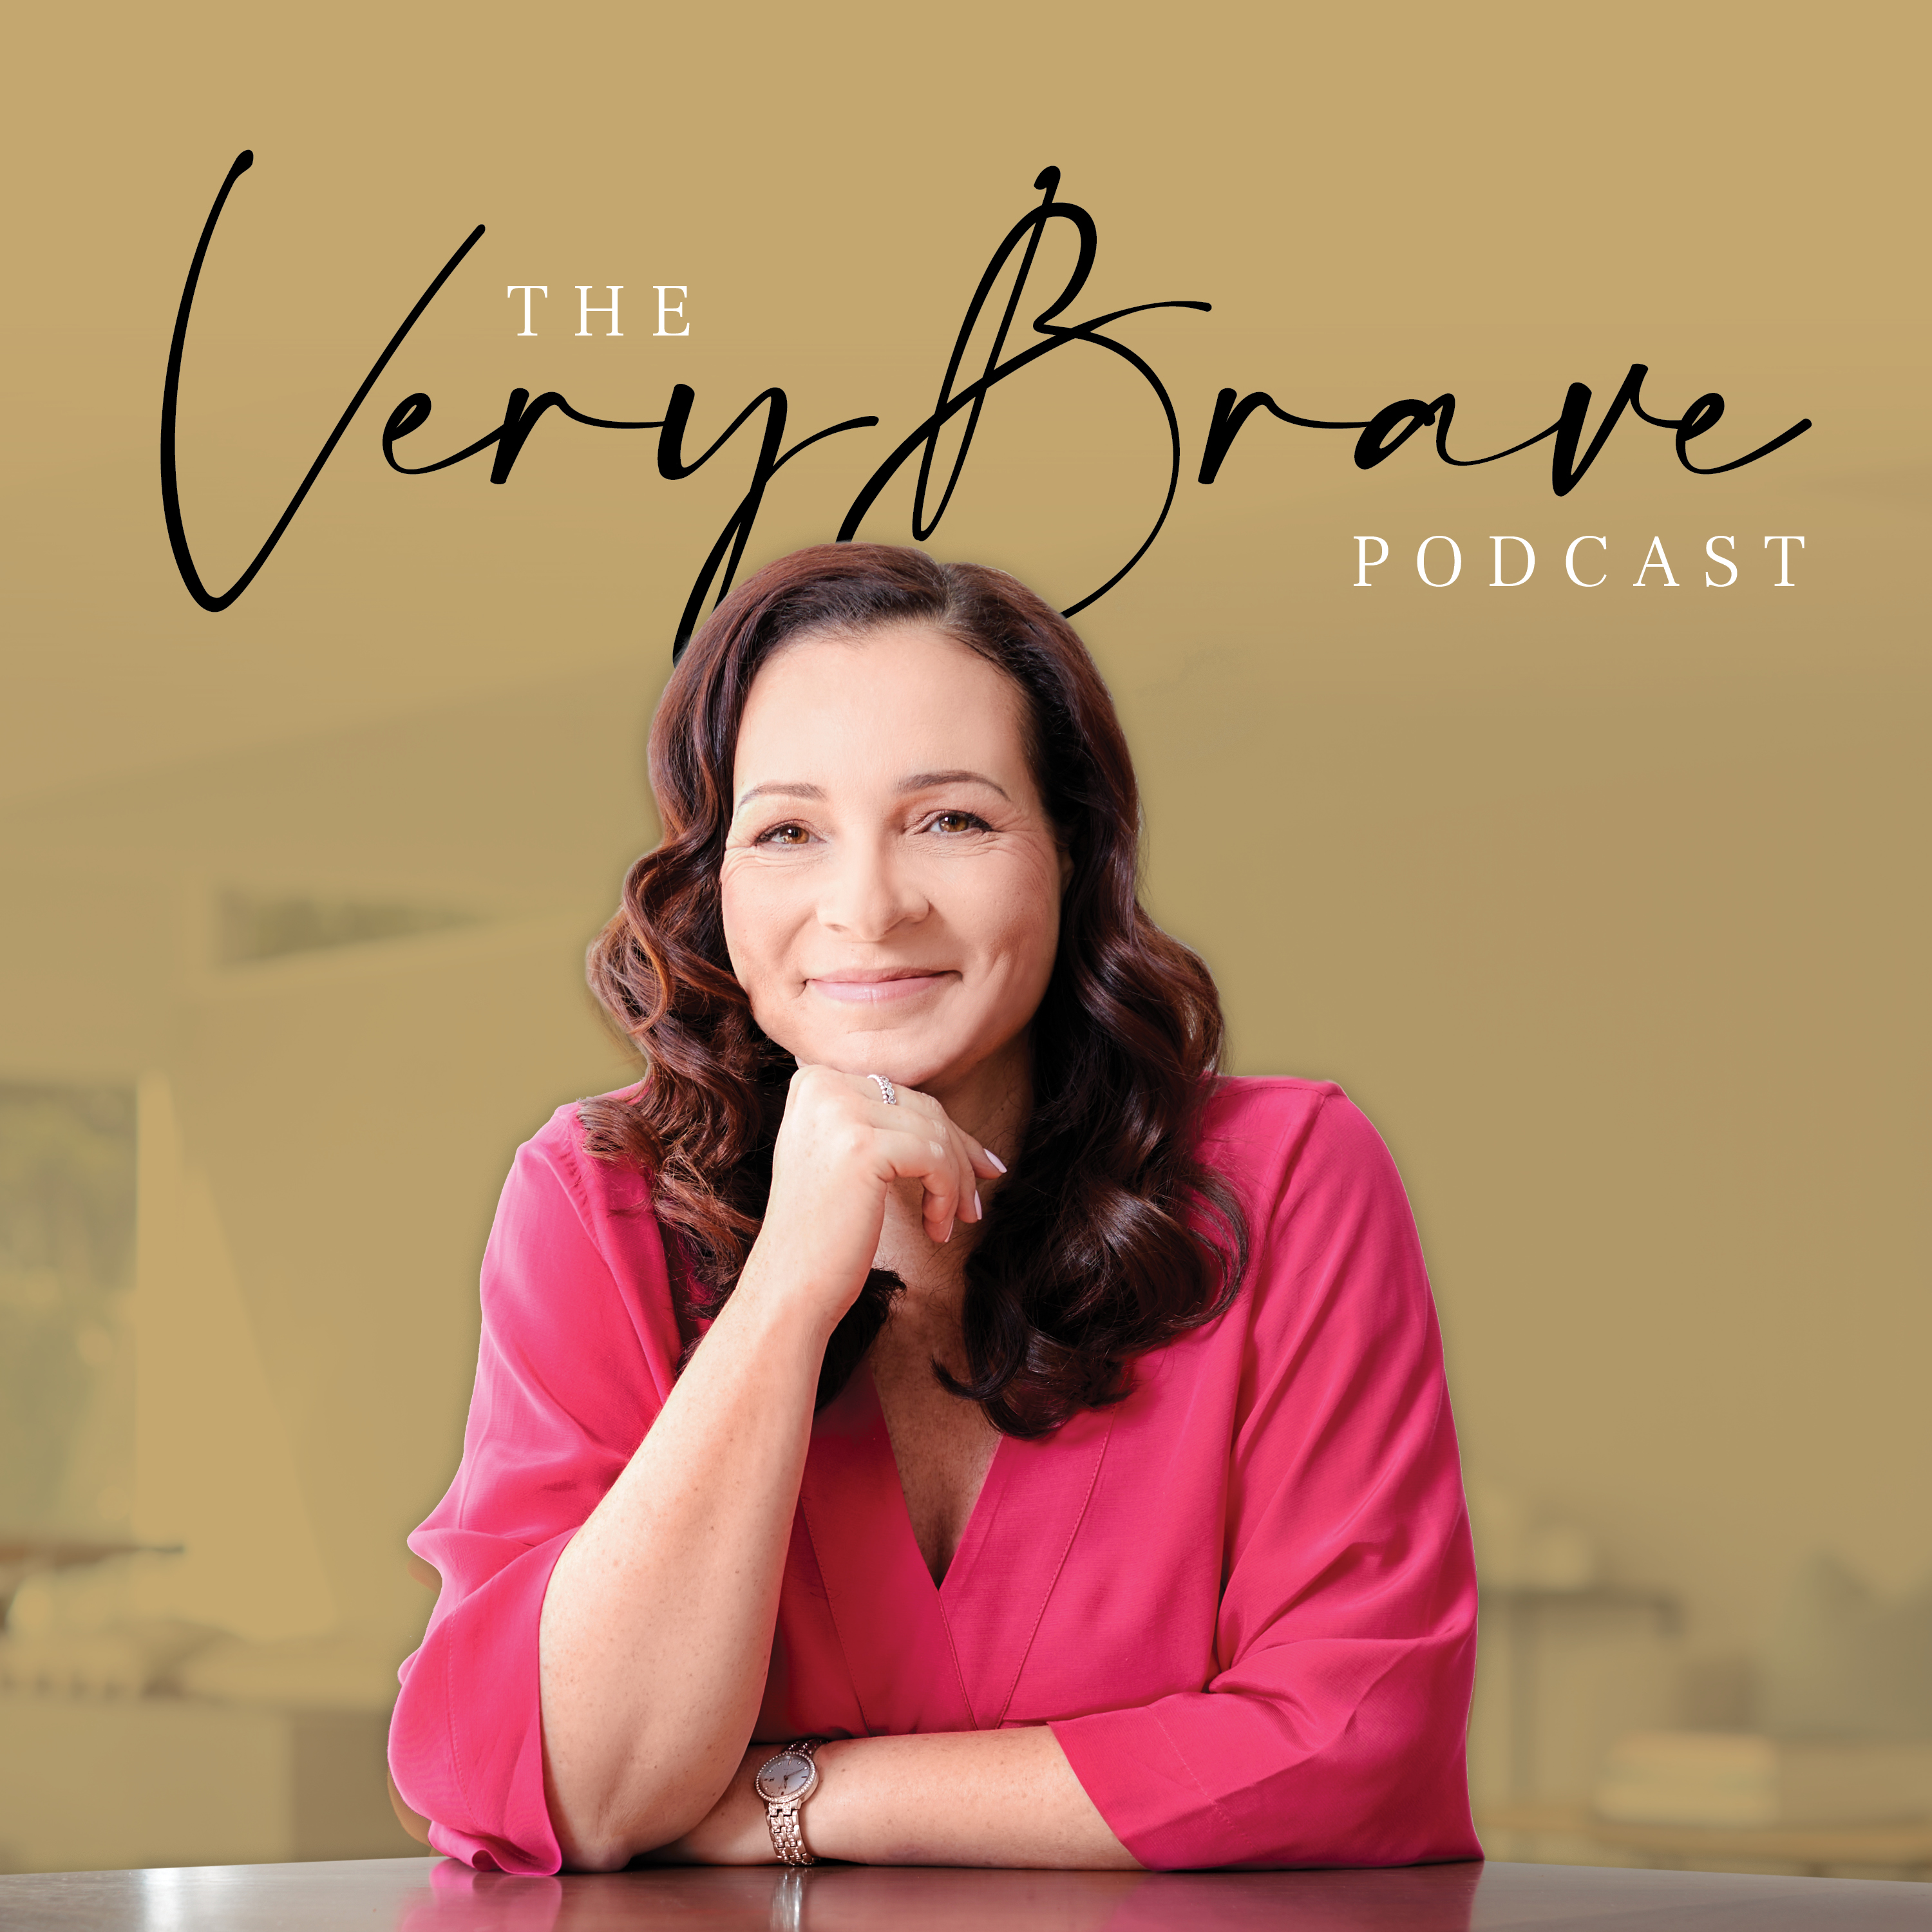 Living Life Courageously with Caroline Brunne